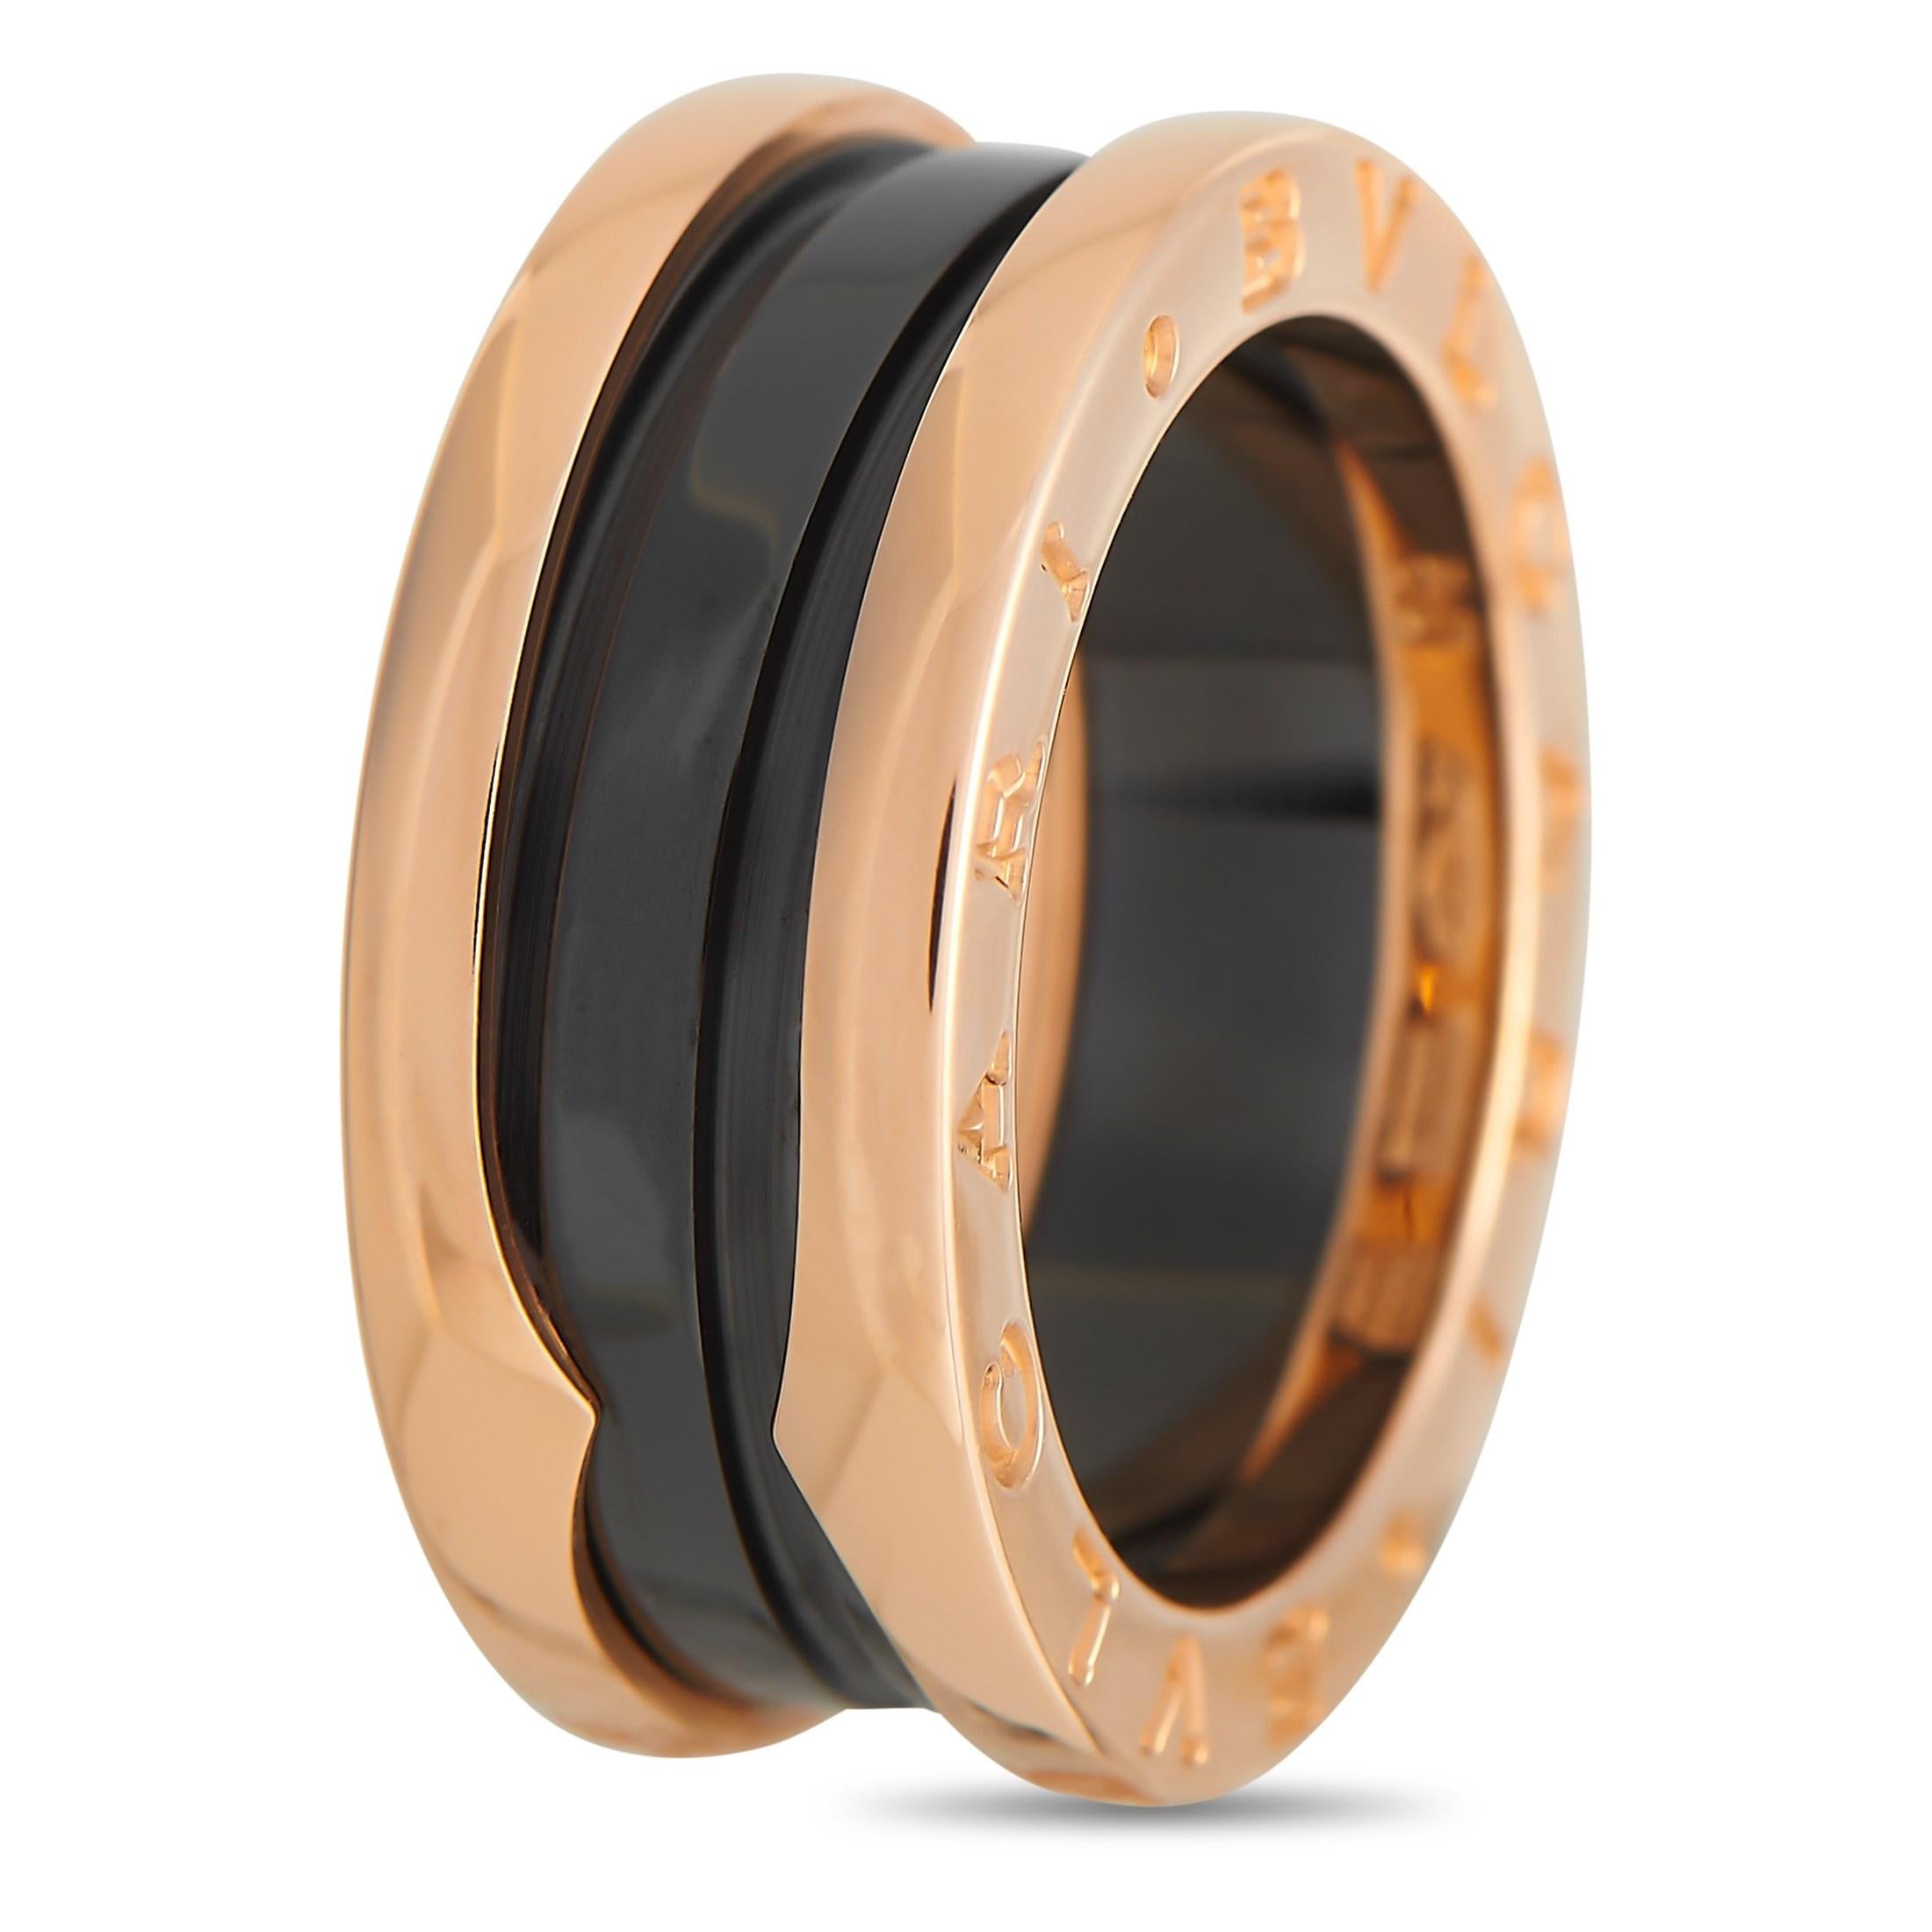 This Bvlgari B.Zero1 band ring beautifully combines opulent 18K Rose Gold with a black ceramic center. Intricate details like the luxury brand’s moniker imprinted on the sides make this an exquisite addition to any collection. It measures 7mm wide